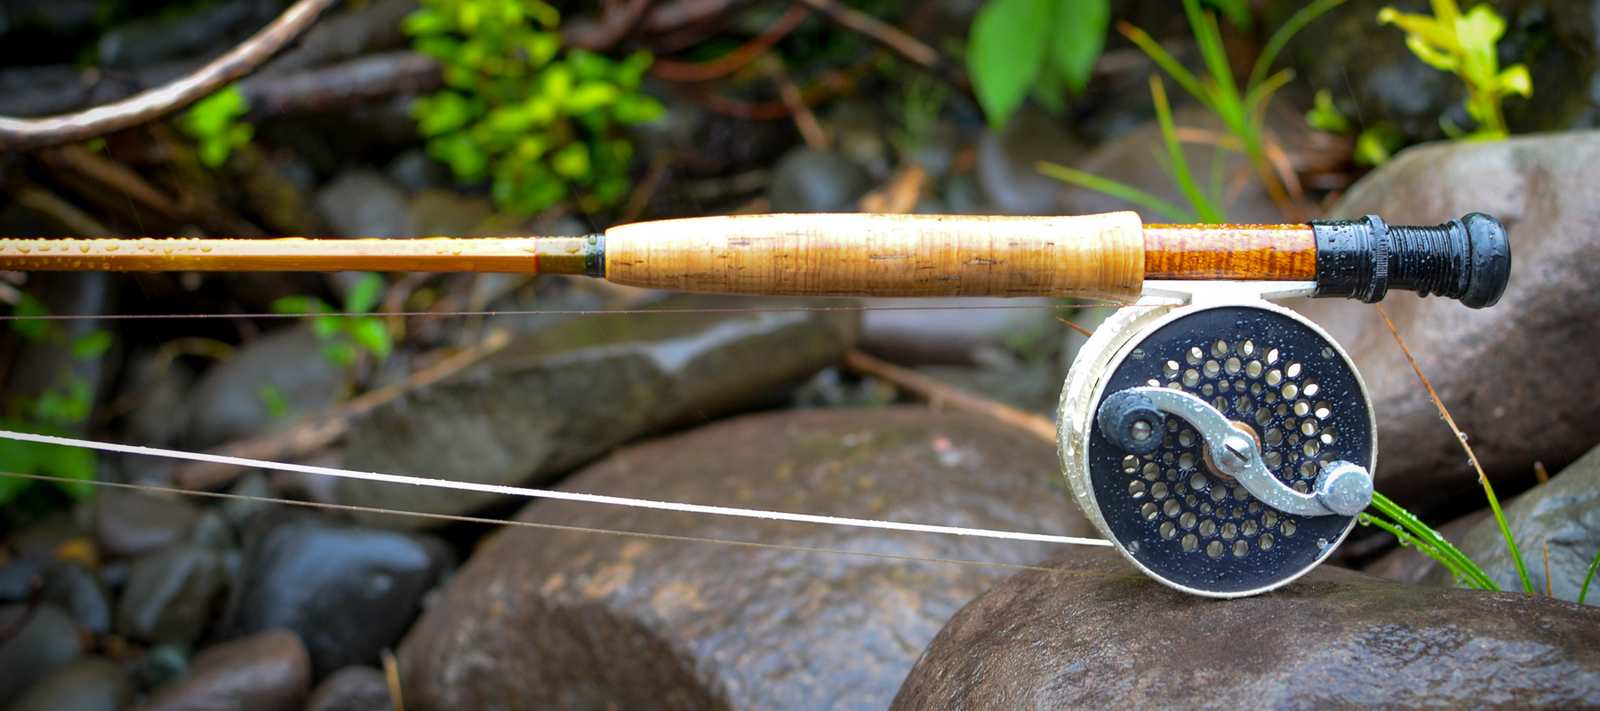 Fly Fishing Rods at Best Price from Manufacturers, Suppliers & Dealers